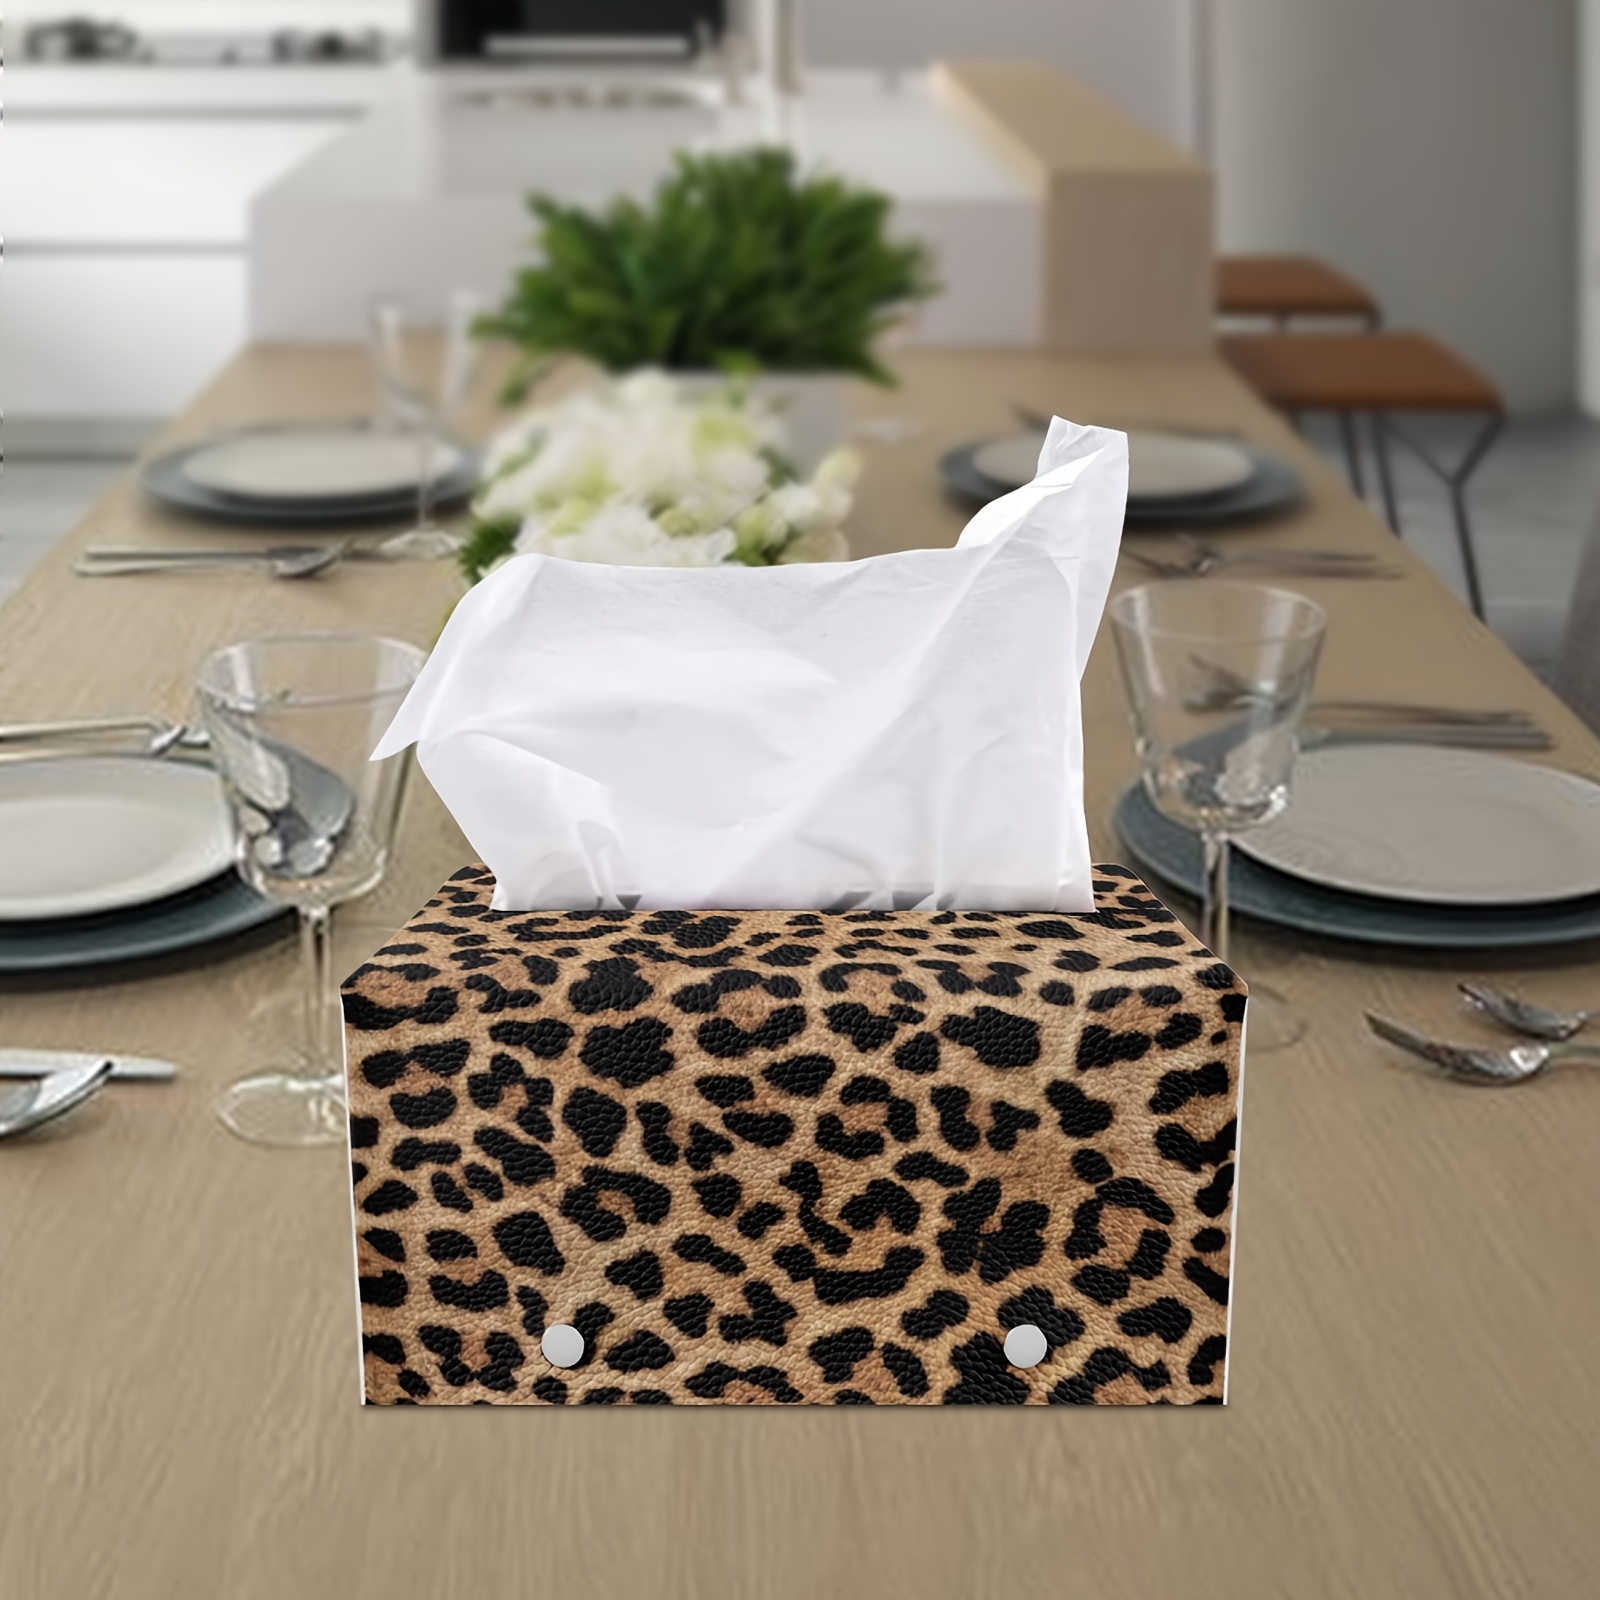 

1pc Vintage Brown Leopard Print Rectangular Leather Tissue Box Holder, For Kitchen, Bedroom, Living Room, Bathroom Decor, Home Accessory, Pu Leather Tissue Holder